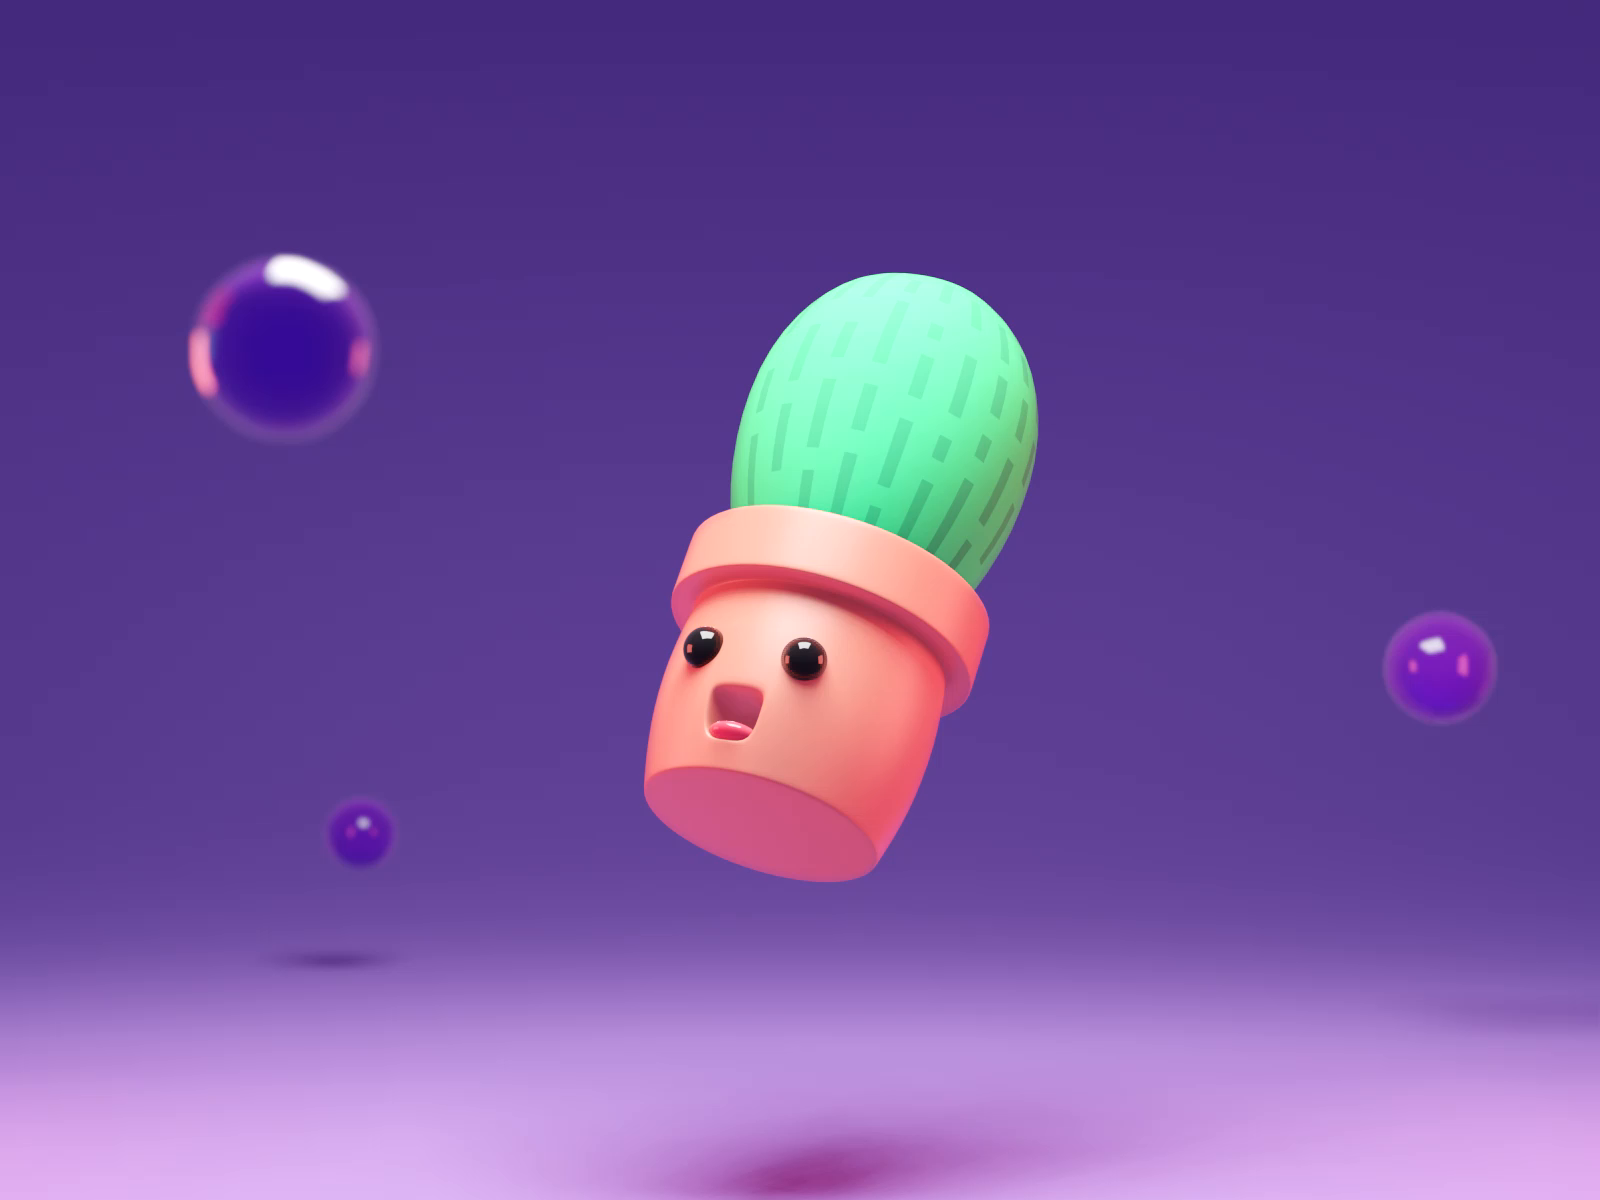 Cute Cactus Animation by Justinas Telksnys on Dribbble